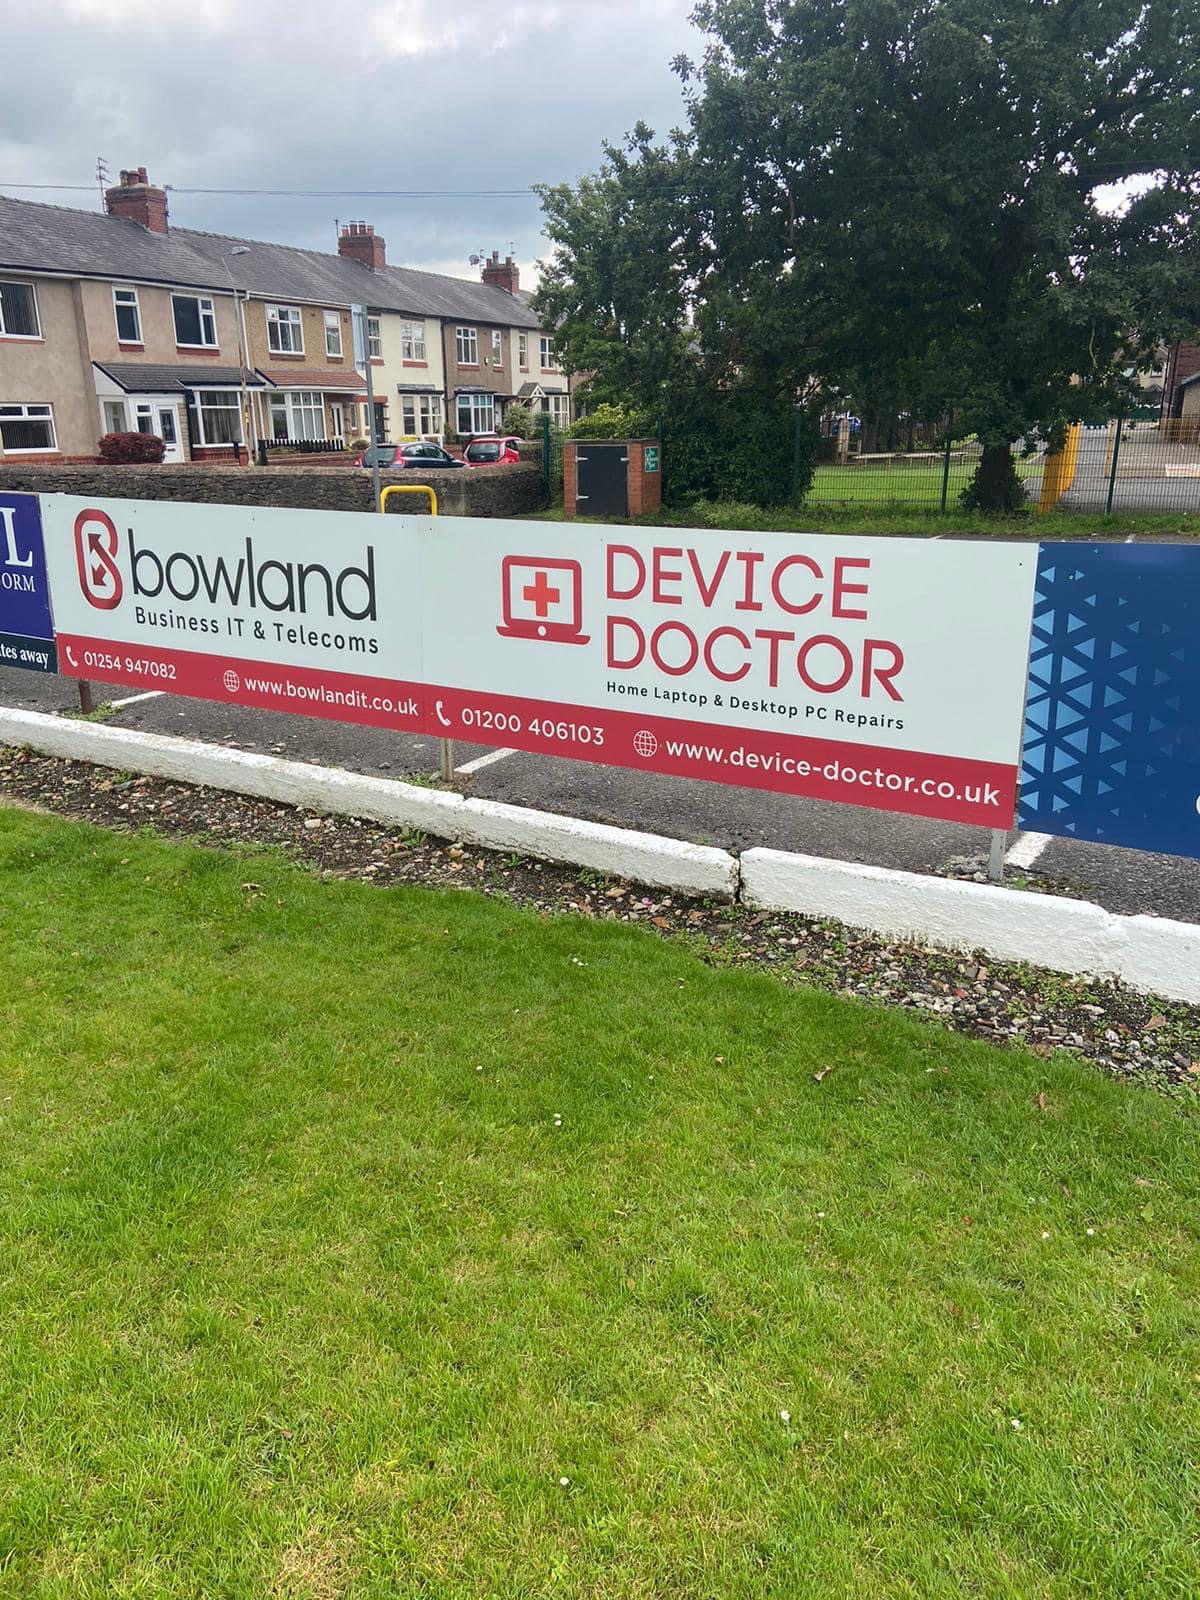 Bowland IT & Device Doctor: Continuing Our Partnership with Clitheroe Cricket Club